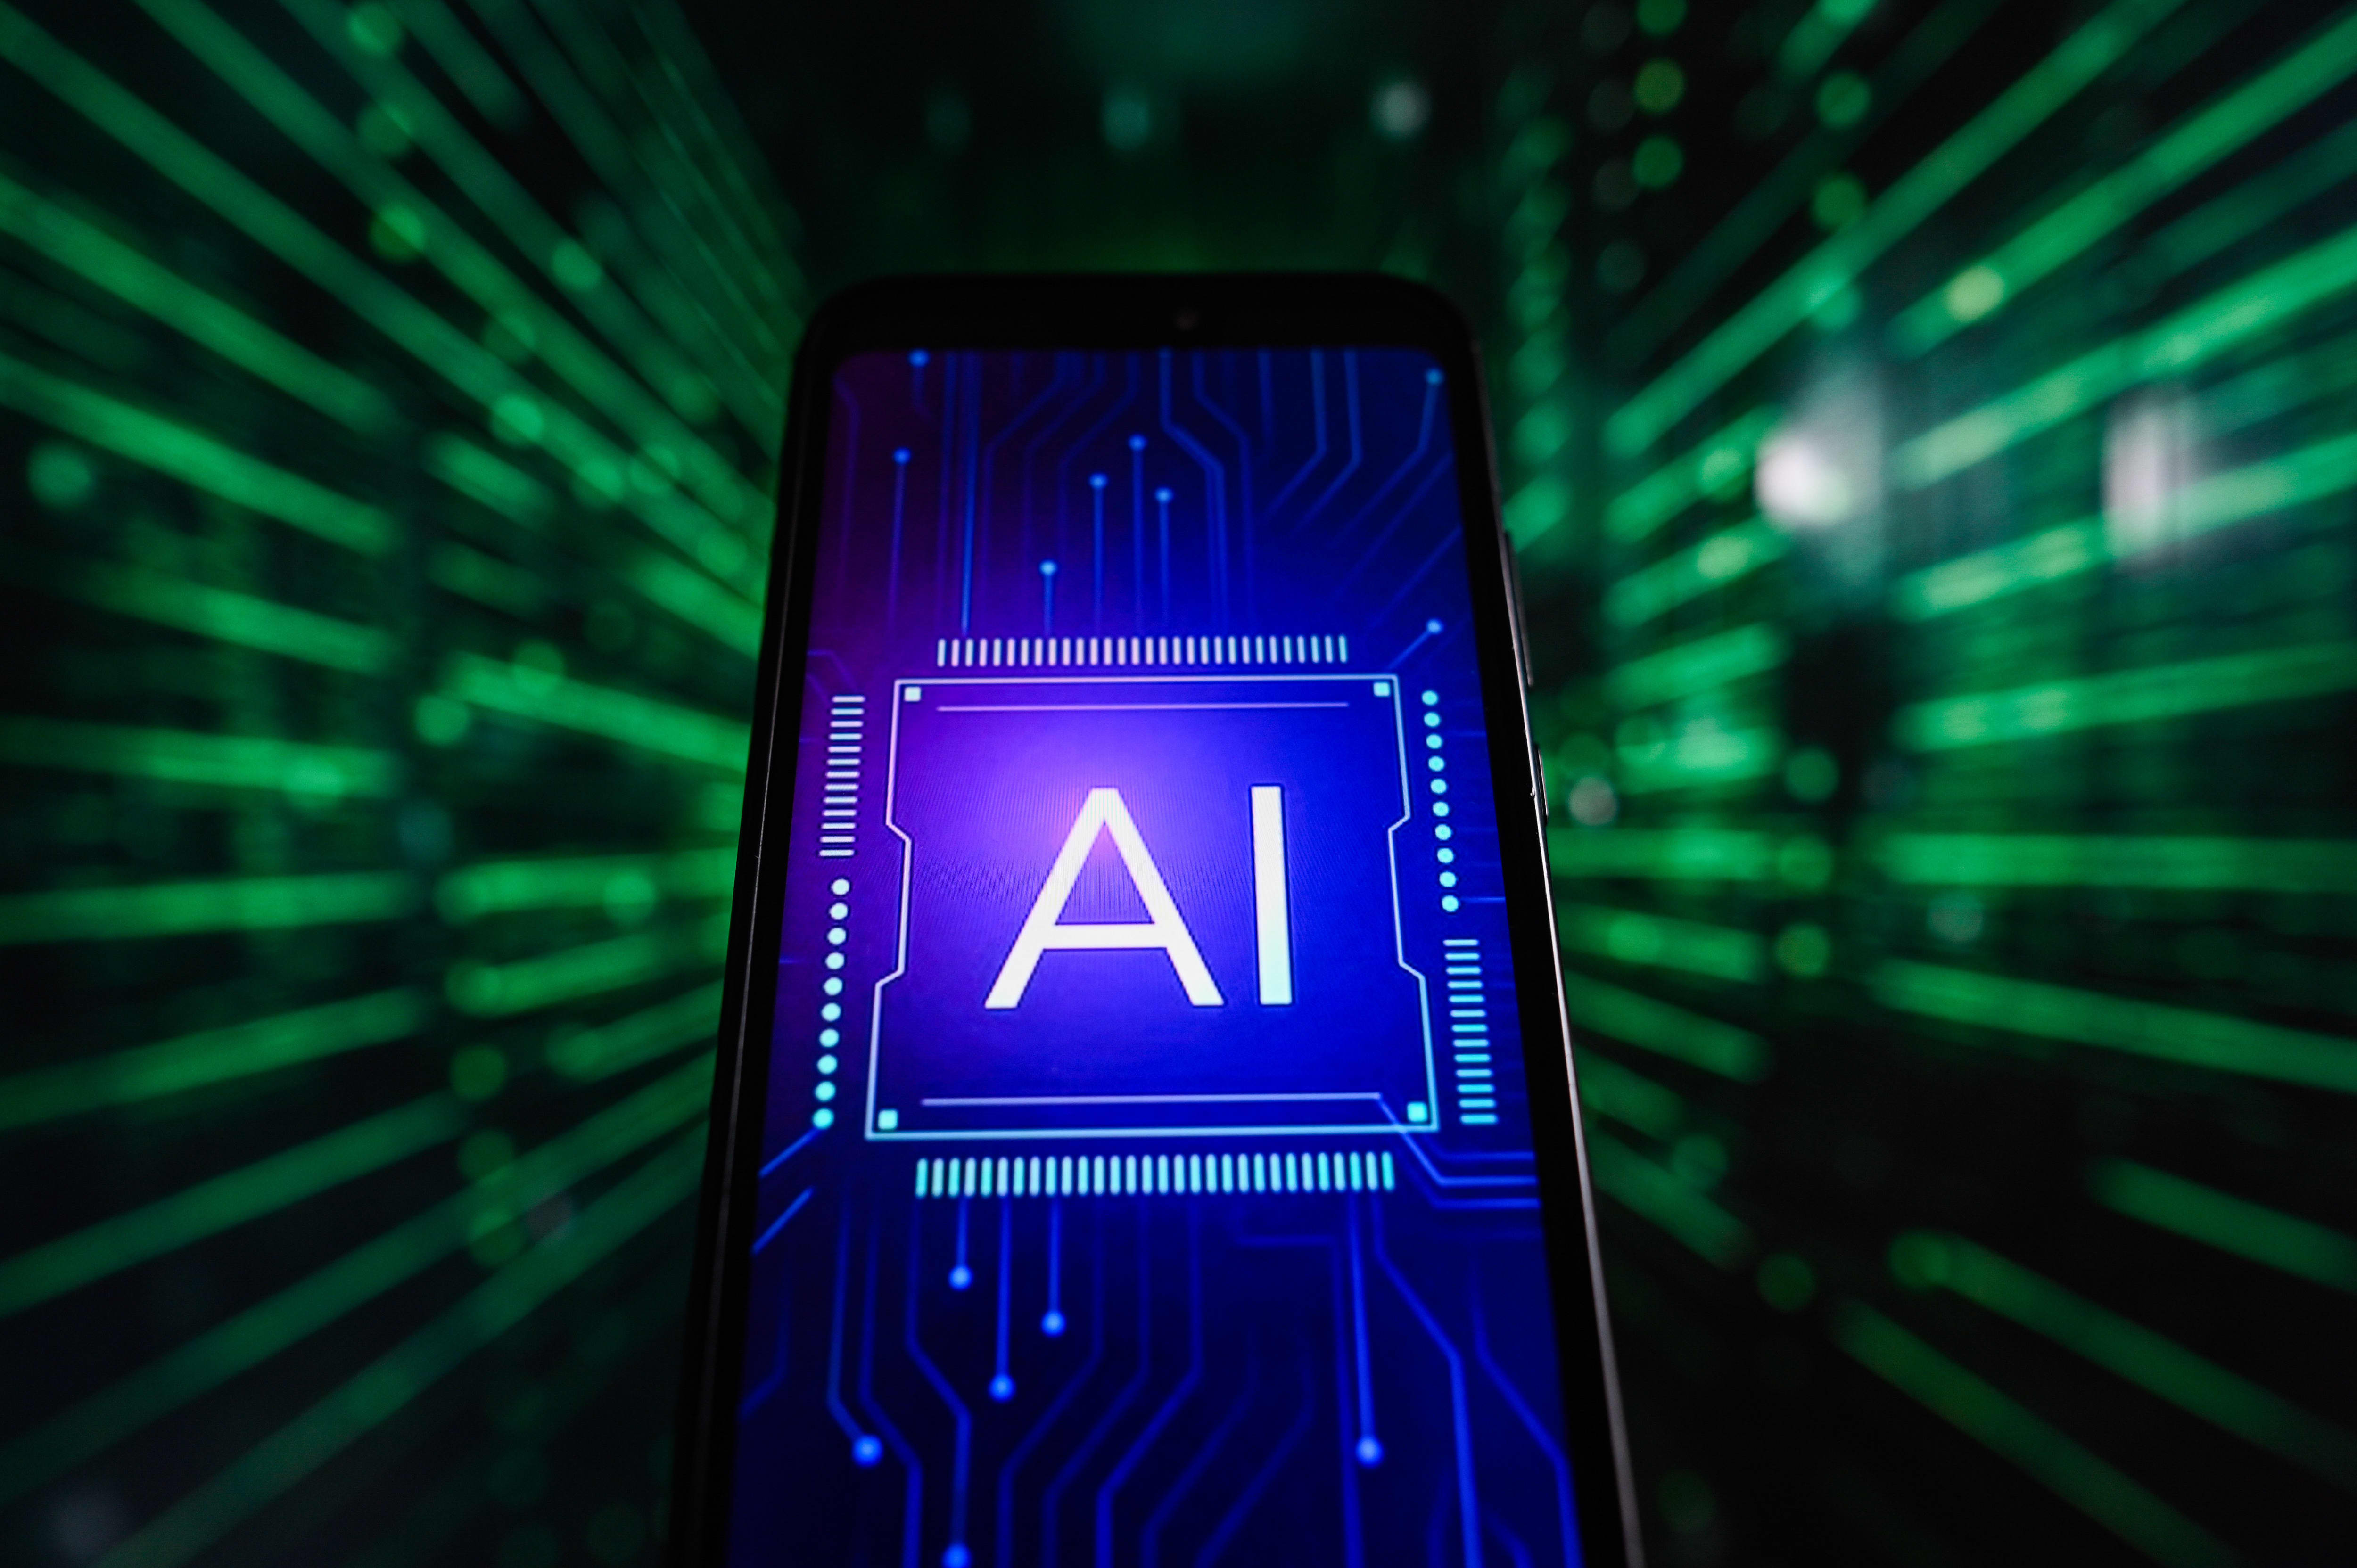 This little-known data center servicer could see A.I. tailwinds, says Bank of America